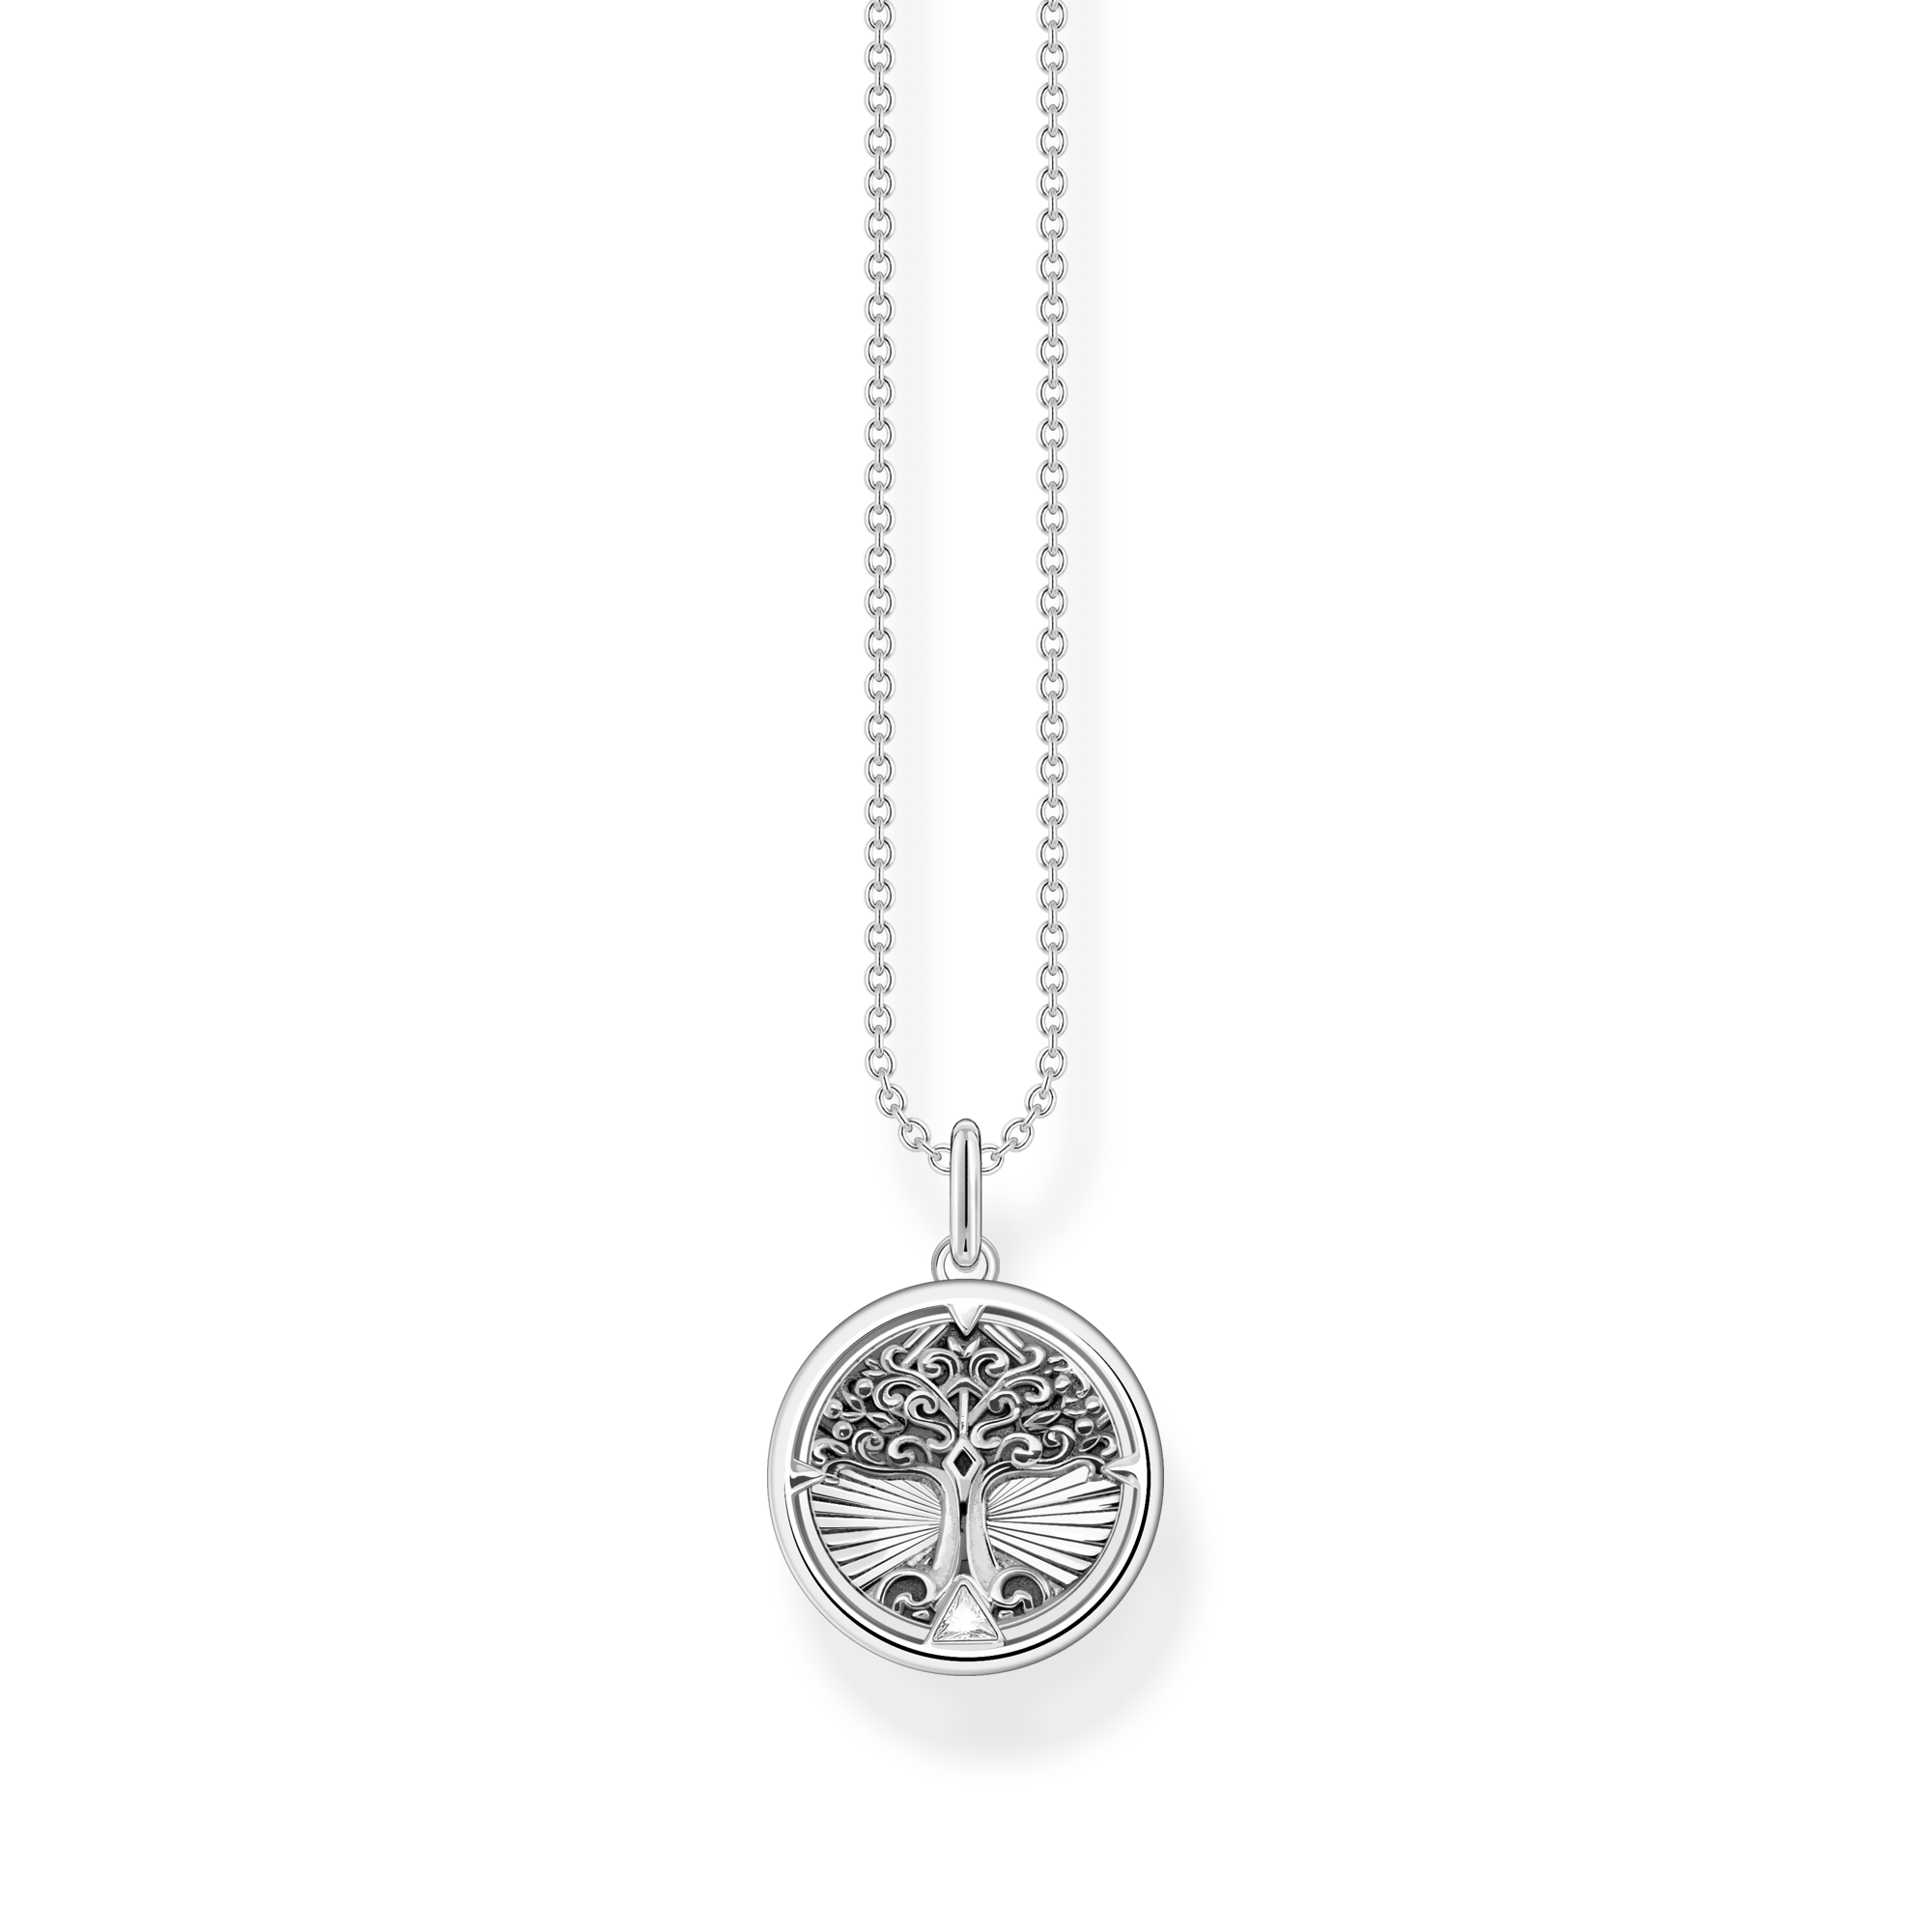 Thomas Sabo PE504-001-12 Men's Necklace with Pendant 925 Sterling Silver